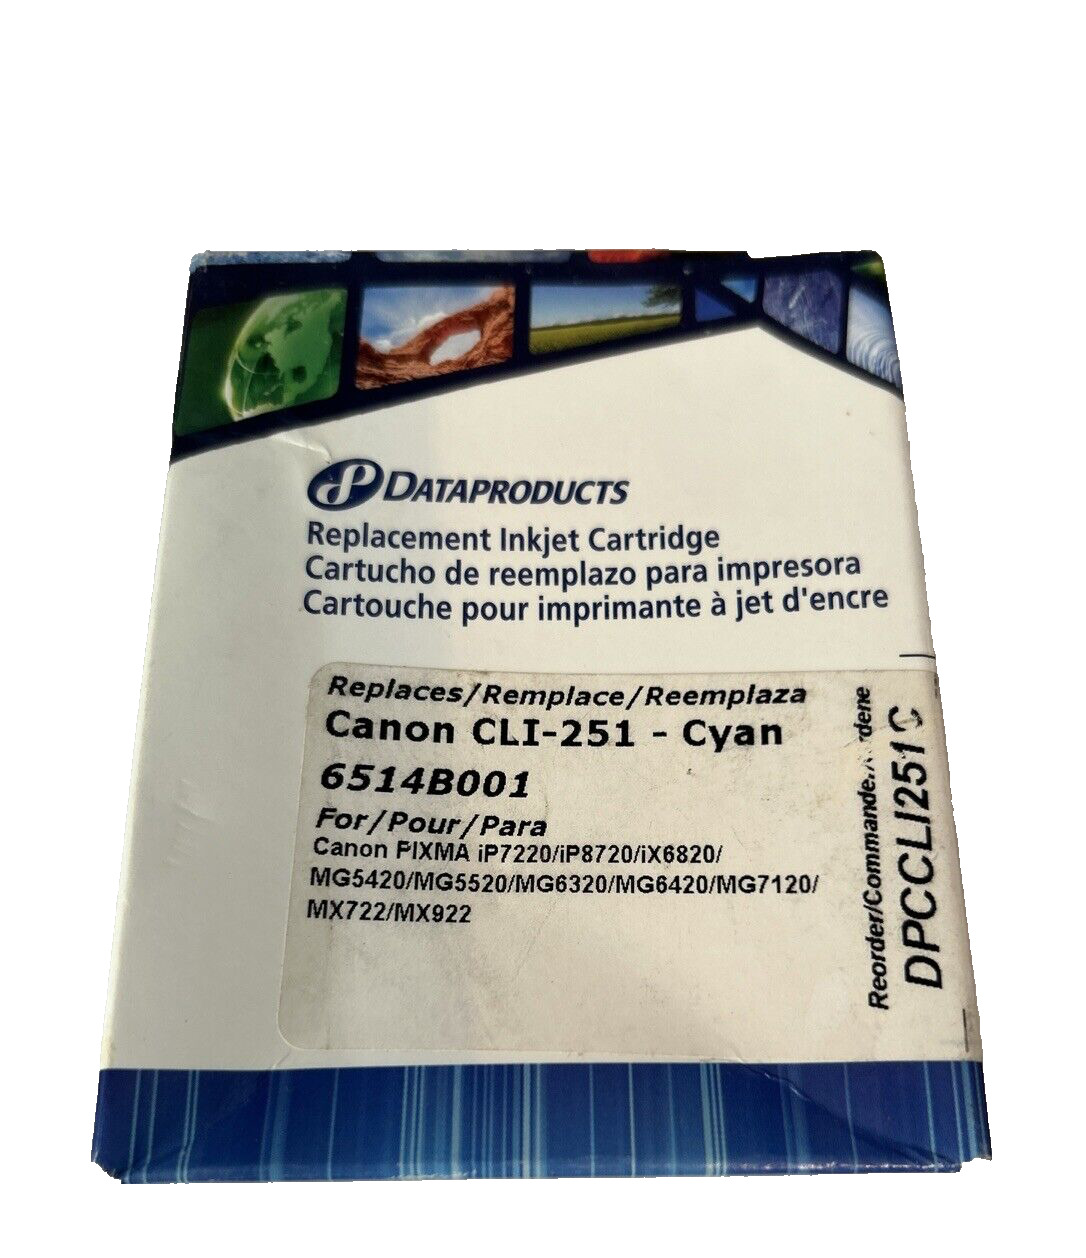 Dataproducts DPCCLI251C Replacement Inkjet Cartridge for CLI-251 CYAN